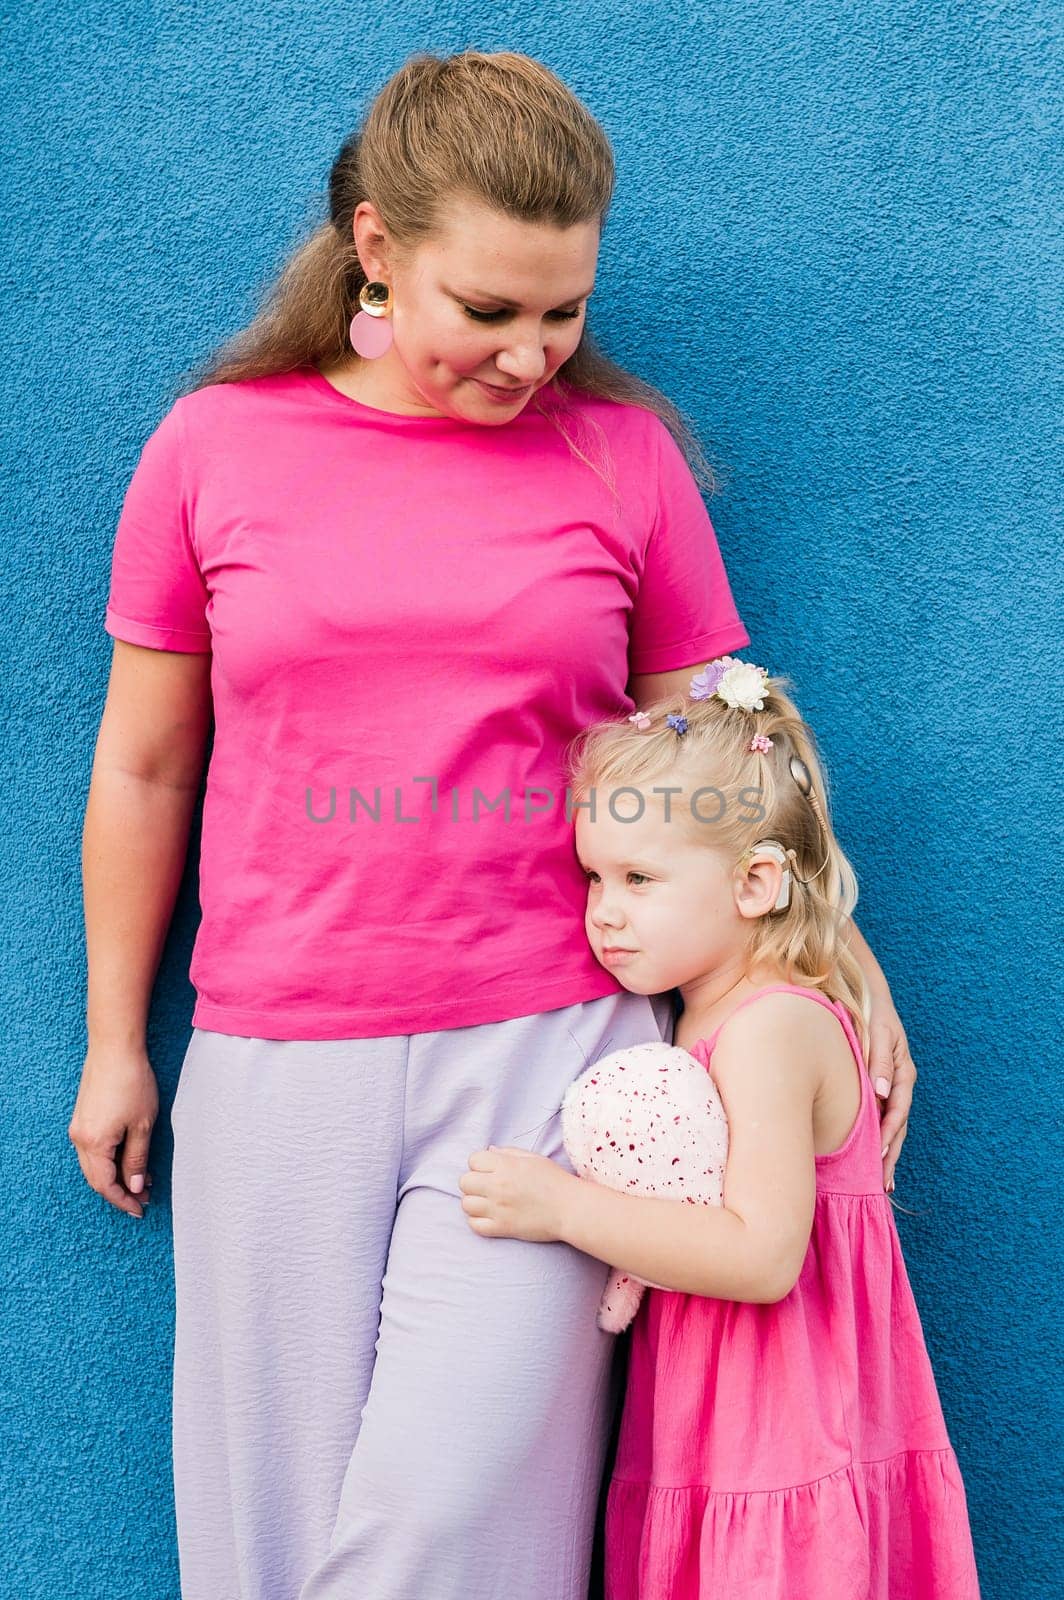 Blonde little girl with cochlear implant playing with her mother outdoor. Hear impairment deaf and health concept. Diversity and inclusion. Copy space.